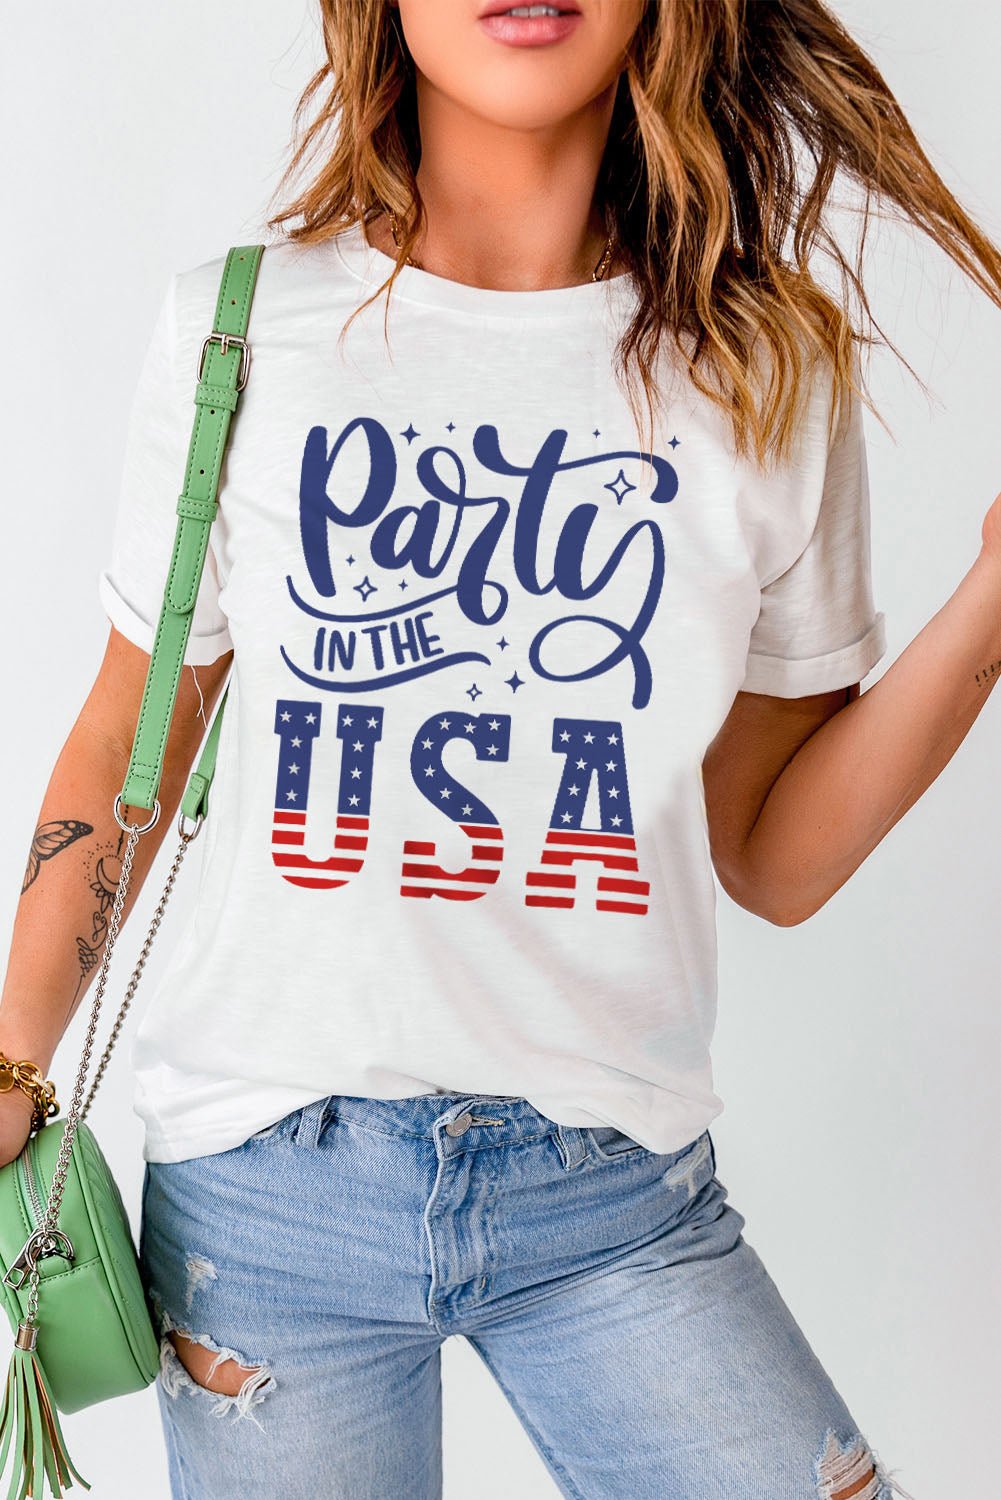 PARTY IN THE USA Round Neck Cuffed Tee - OMG! Rose